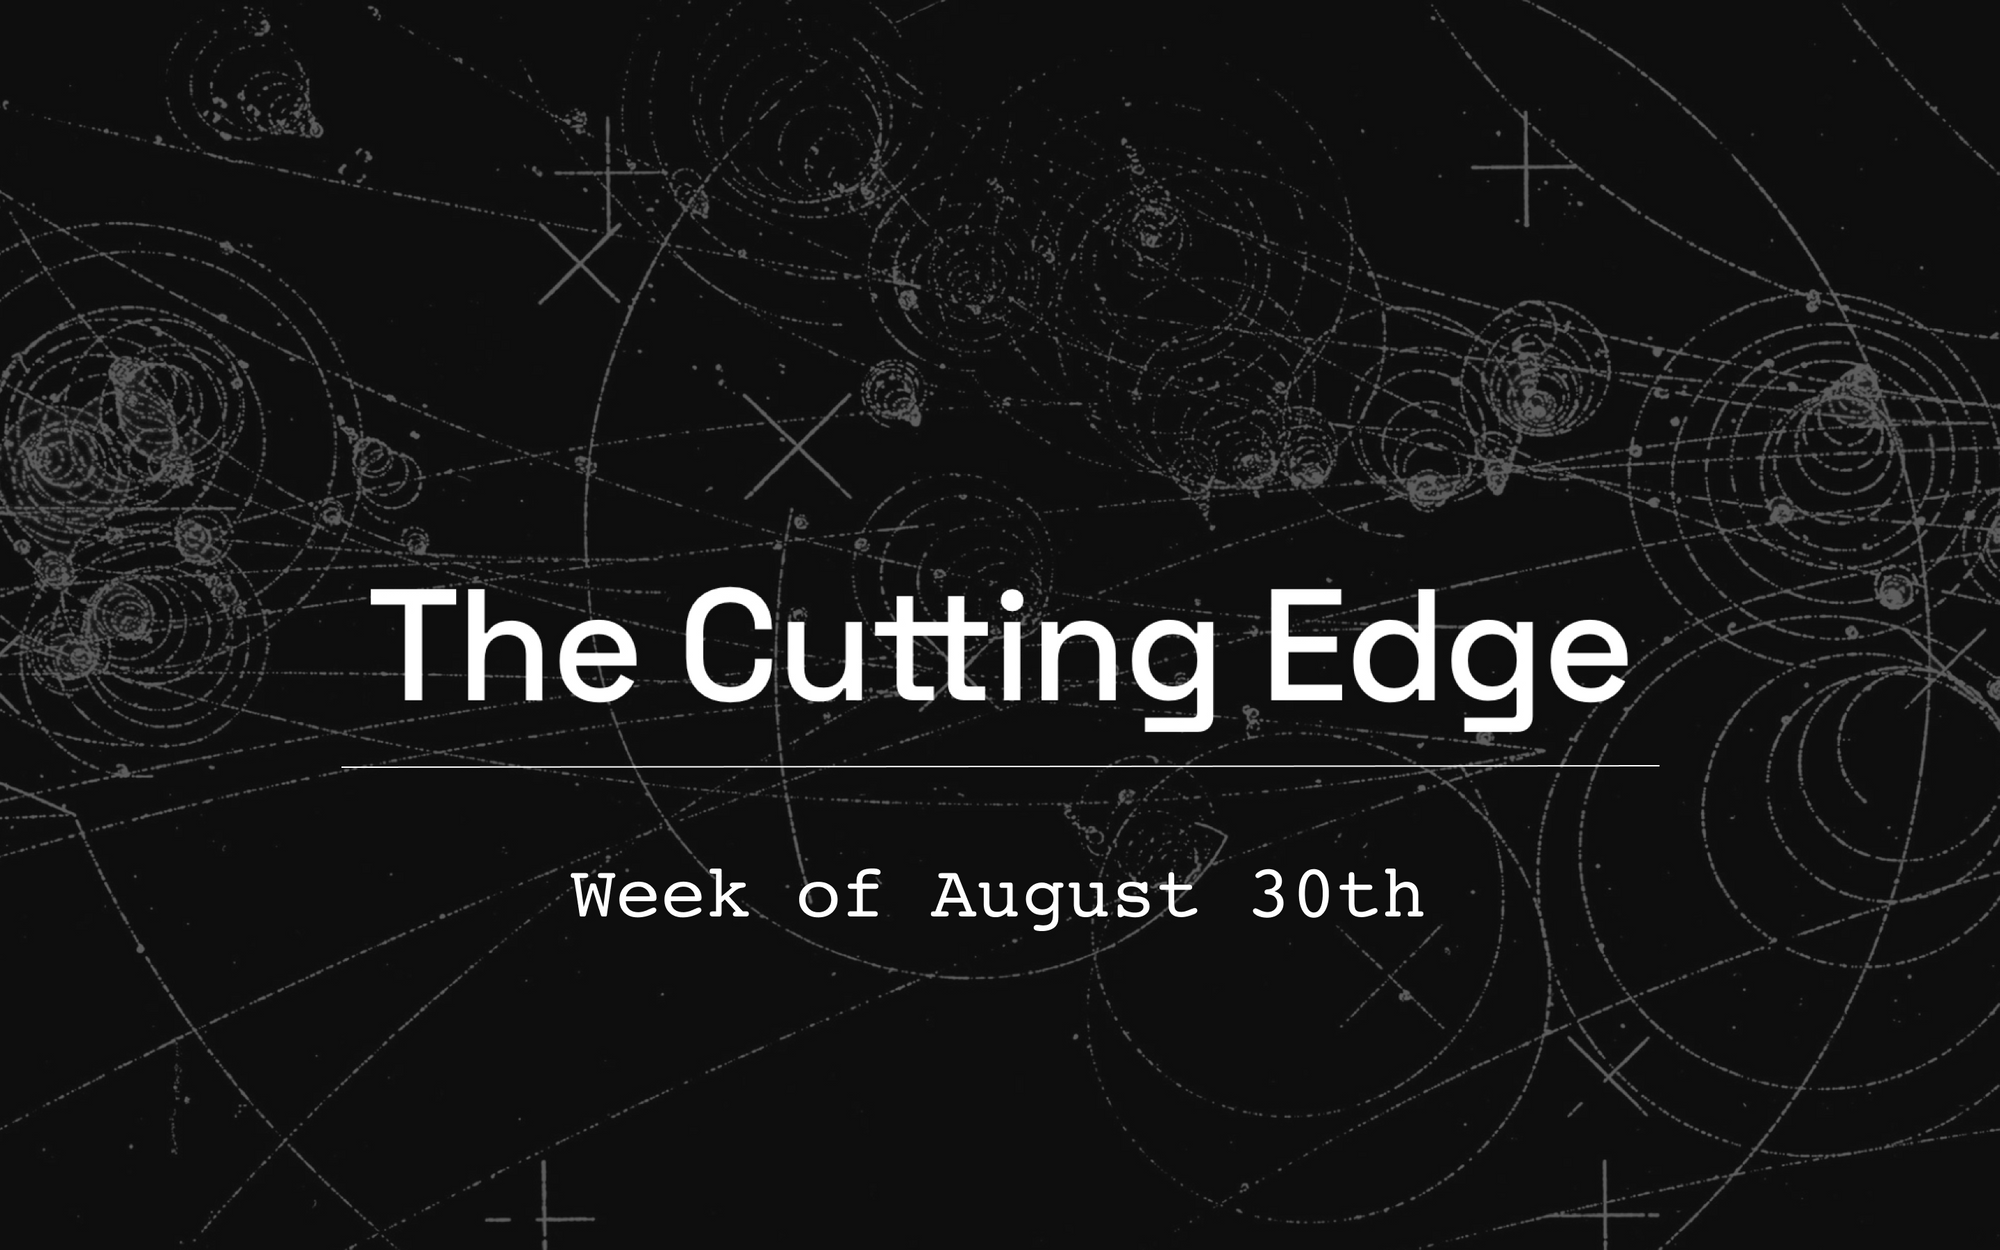 The Cutting Edge: Week of August 30th